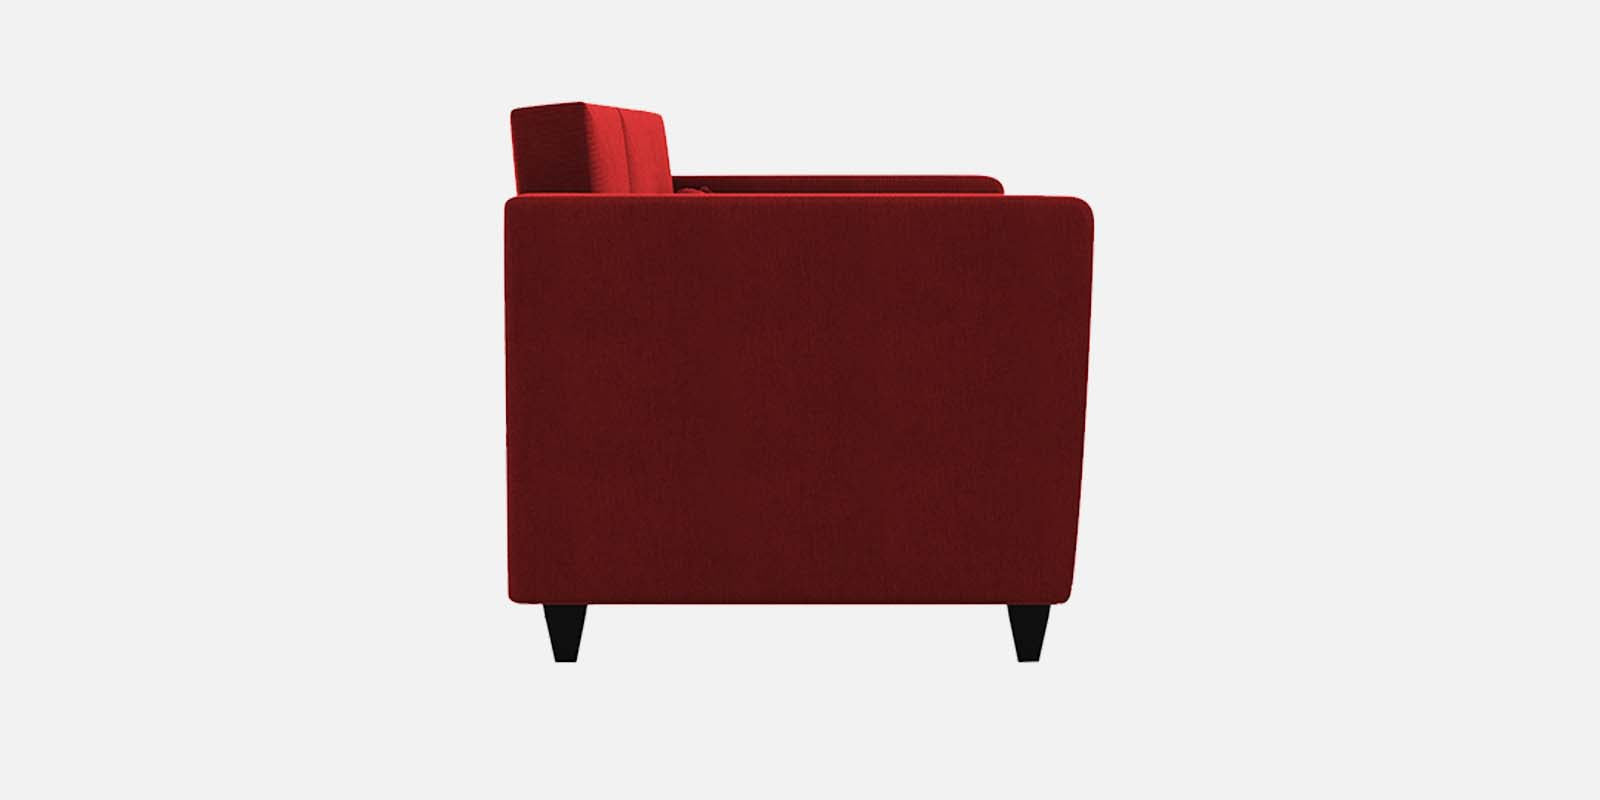 Tokyo Fabric 2 Seater Sofa in Blood Maroon Colour